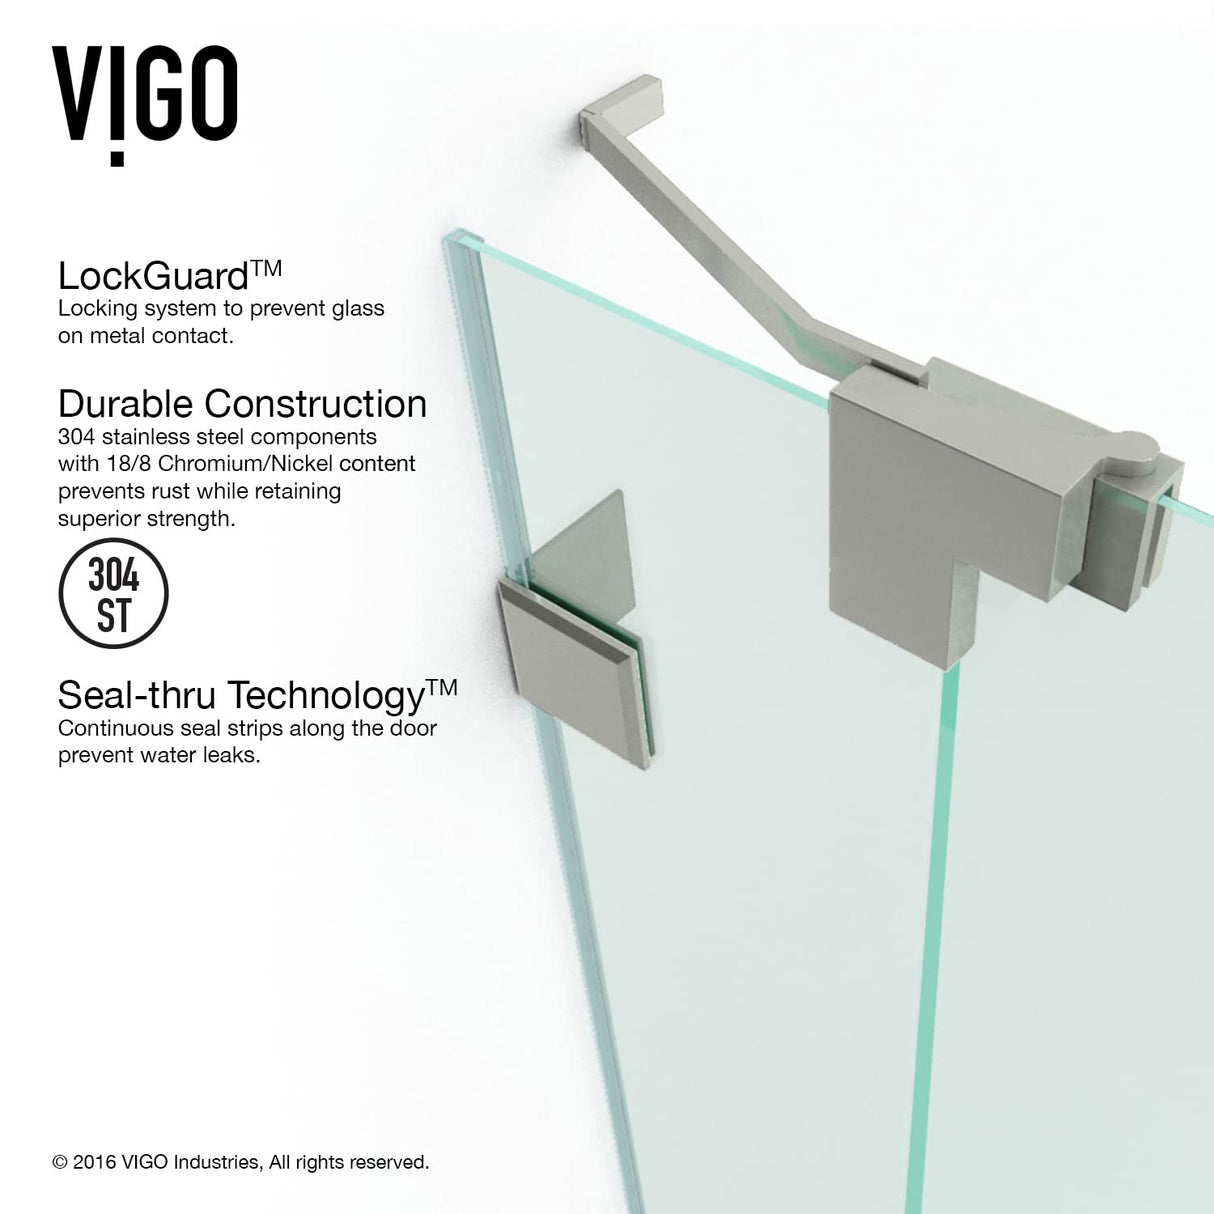 VIGO Adjustable 30 - 36 in. W x 72 in. H Frameless Pivot Rectangle Shower Door with Clear Tempered Glass and St. Steel Hardware in Brushed Nickel Finish with Reversible Handle - VG6042BNCL36